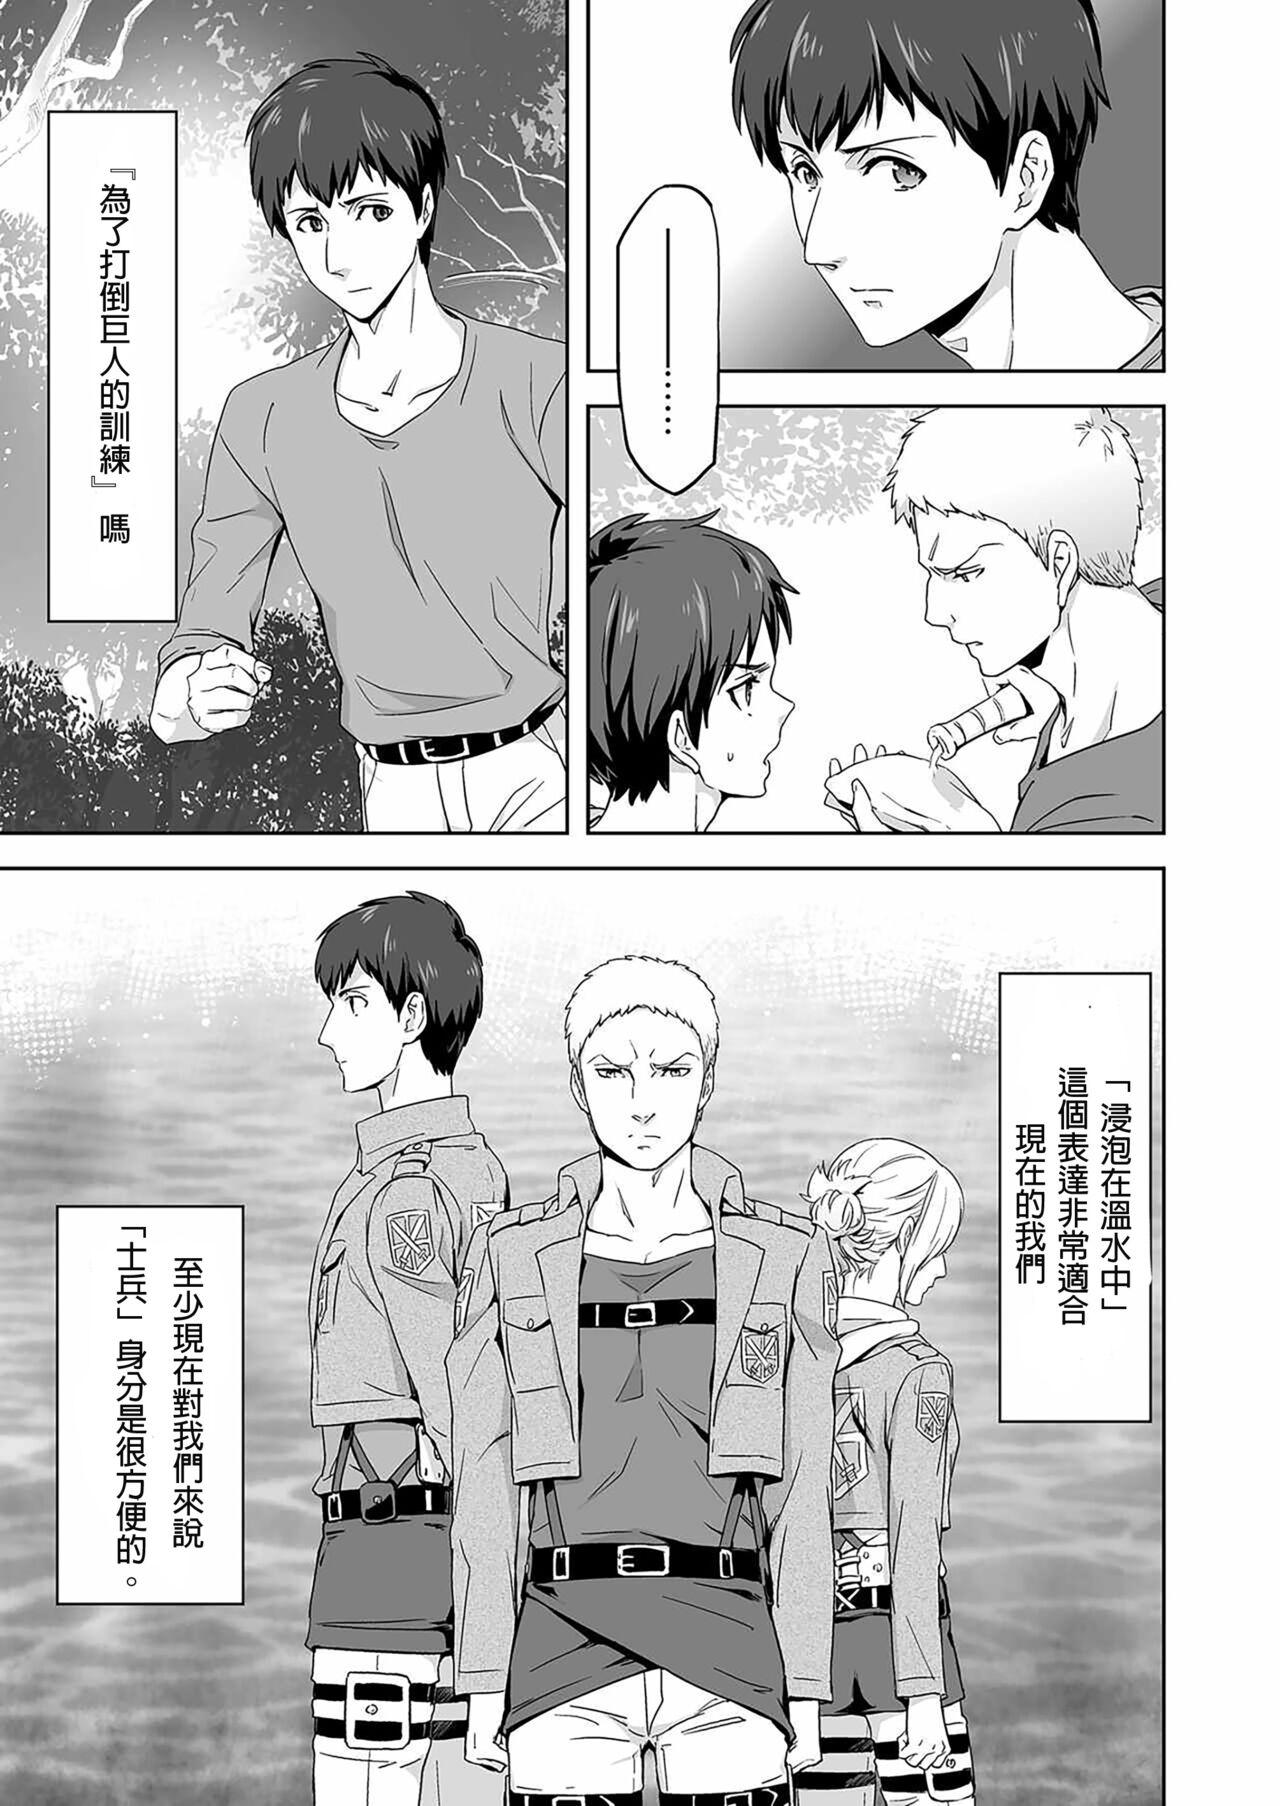 Fucking Pussy Reiner Braun x Bertolt Hoover   are the ma ssa cre - Shingeki no kyojin | attack on titan Family Taboo - Page 10